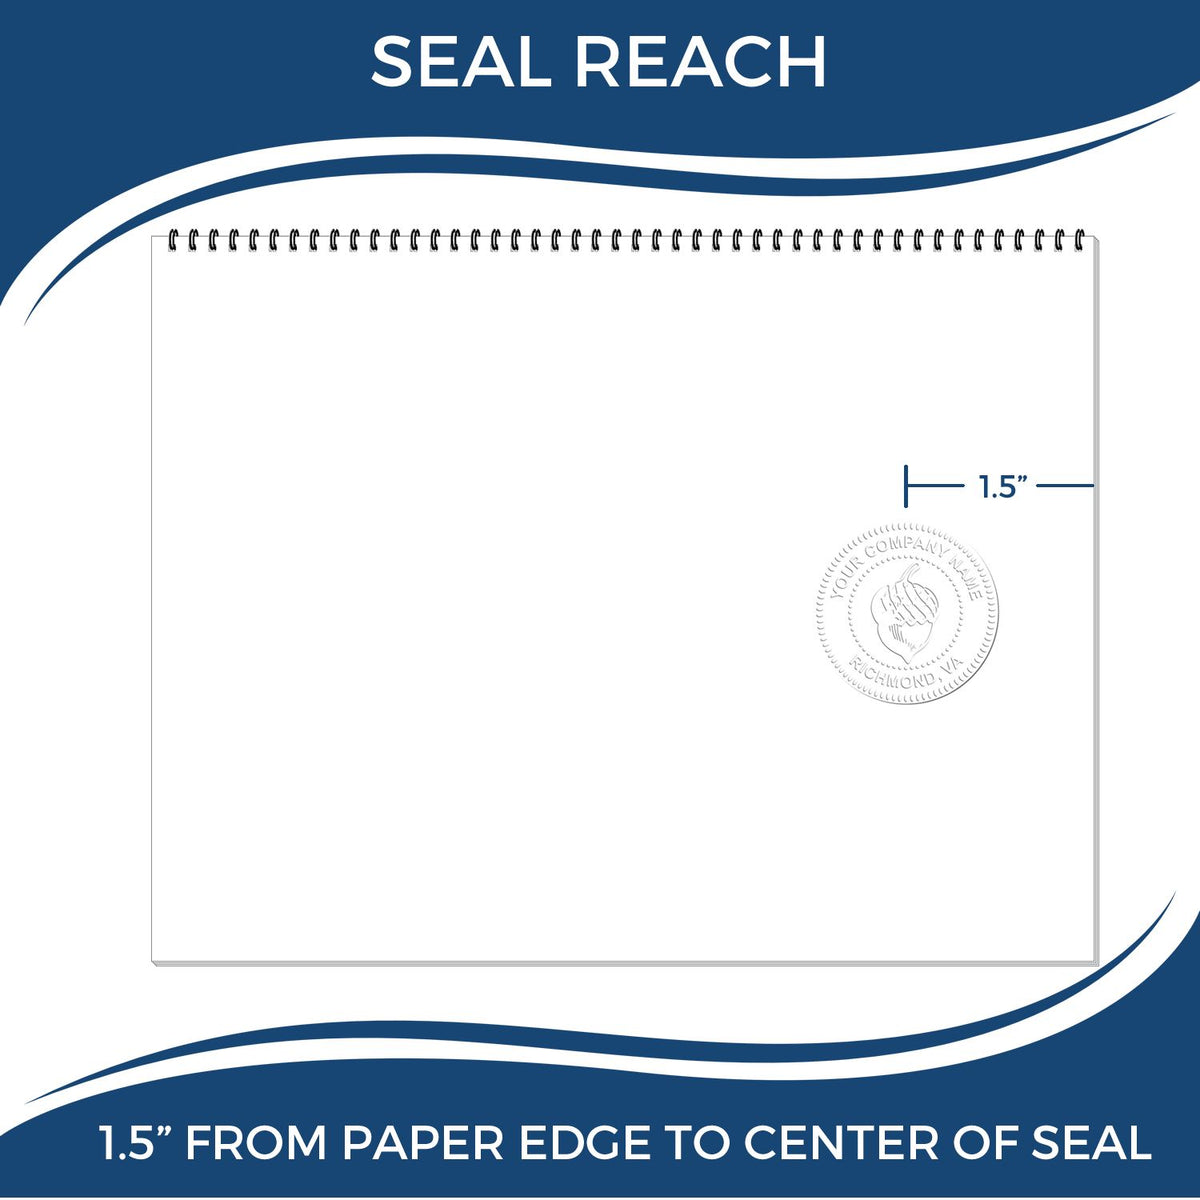 An infographic showing the seal reach which is represented by a ruler and a miniature seal image of the Delaware Geologist Desk Seal